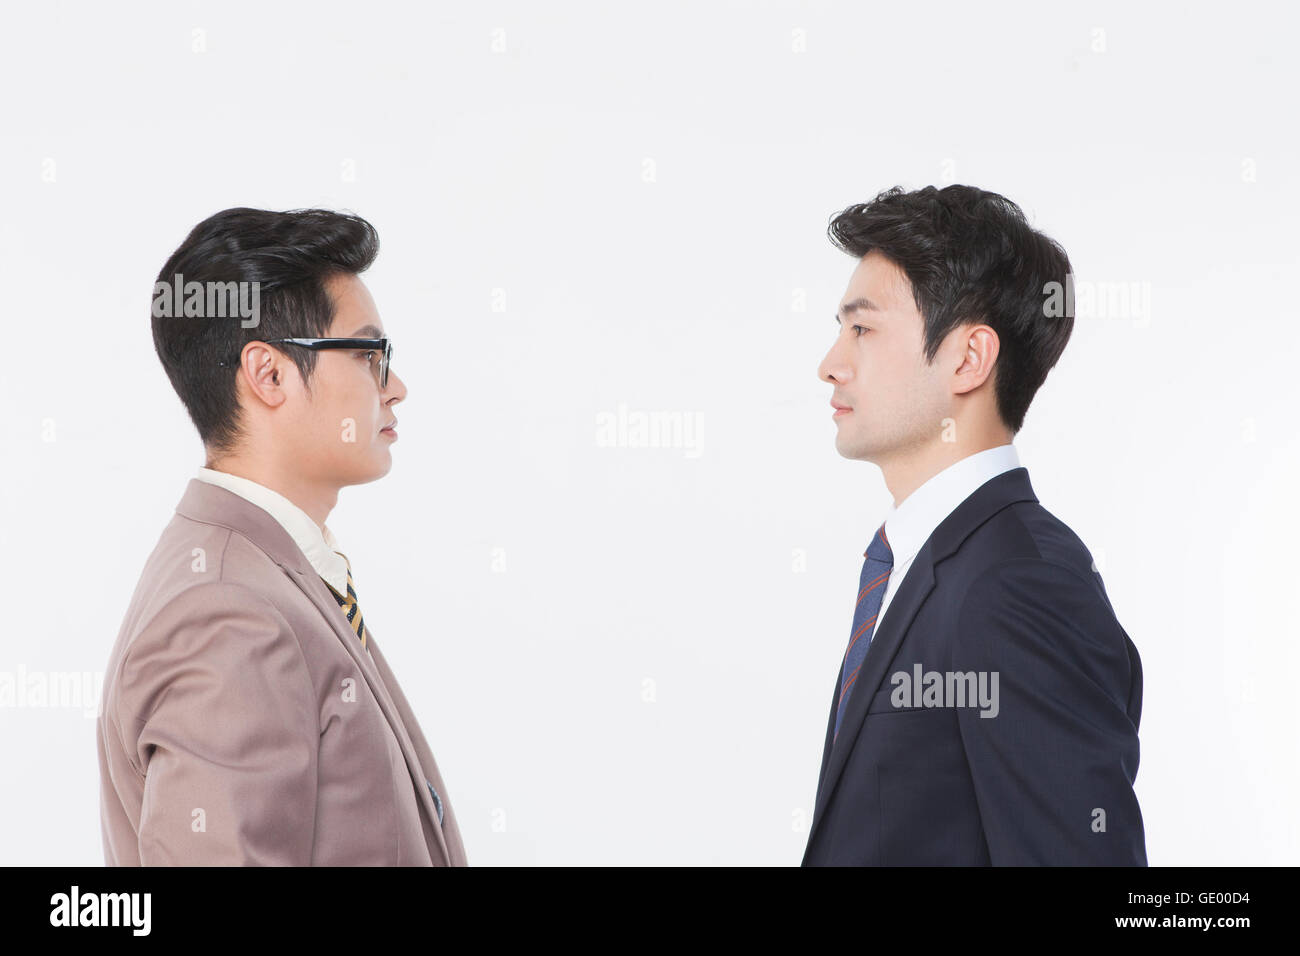 Side view portrait of two business men face to face Stock Photo